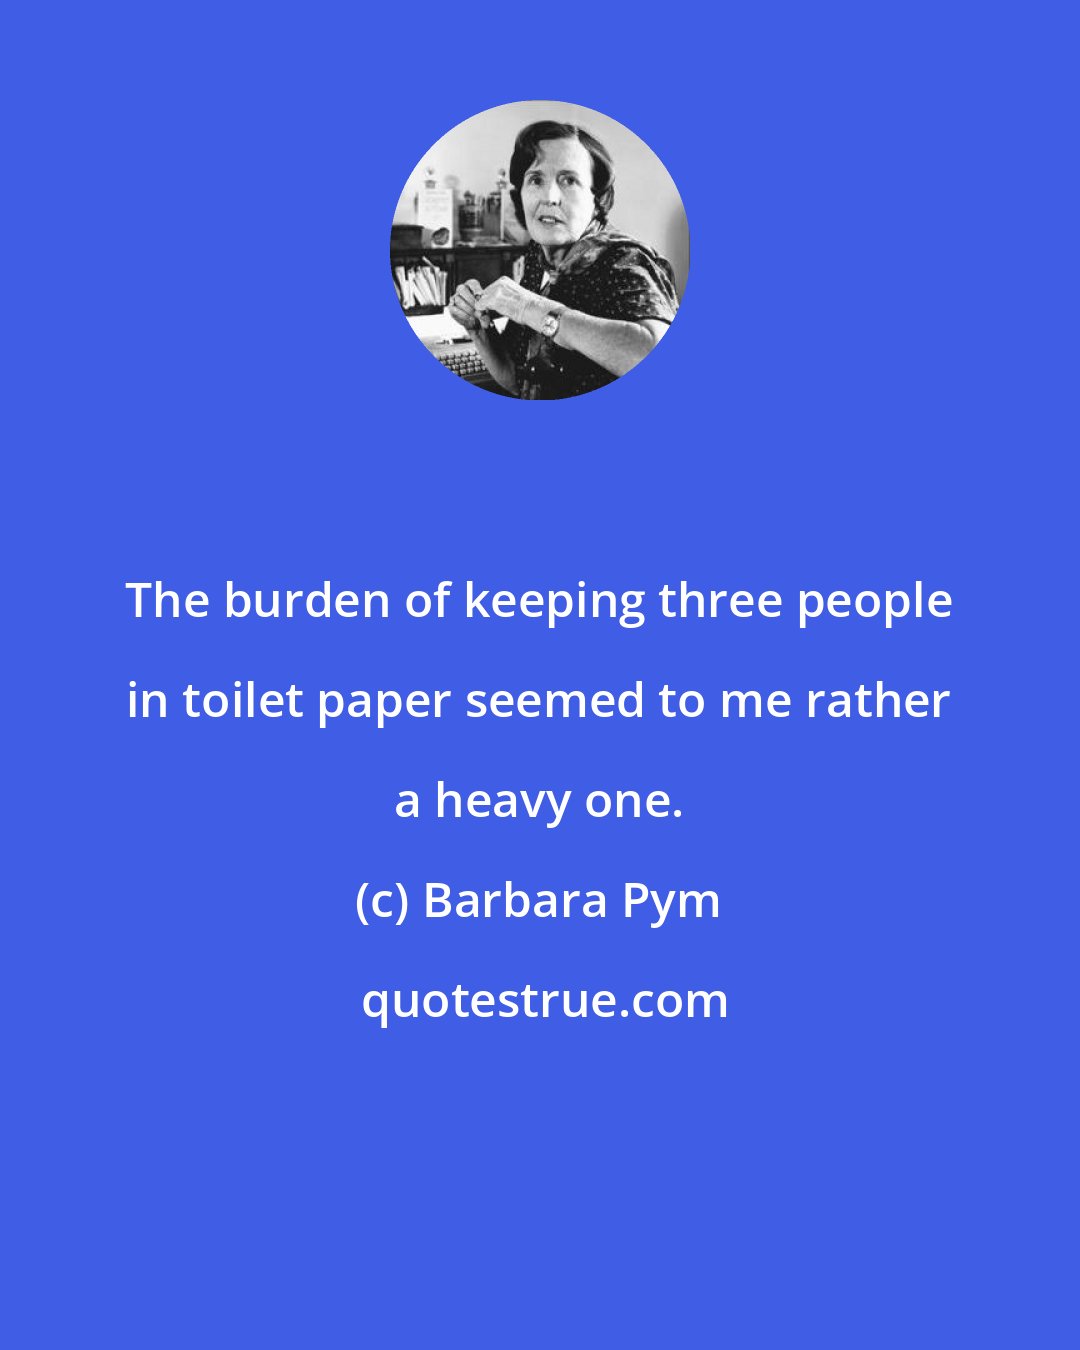 Barbara Pym: The burden of keeping three people in toilet paper seemed to me rather a heavy one.